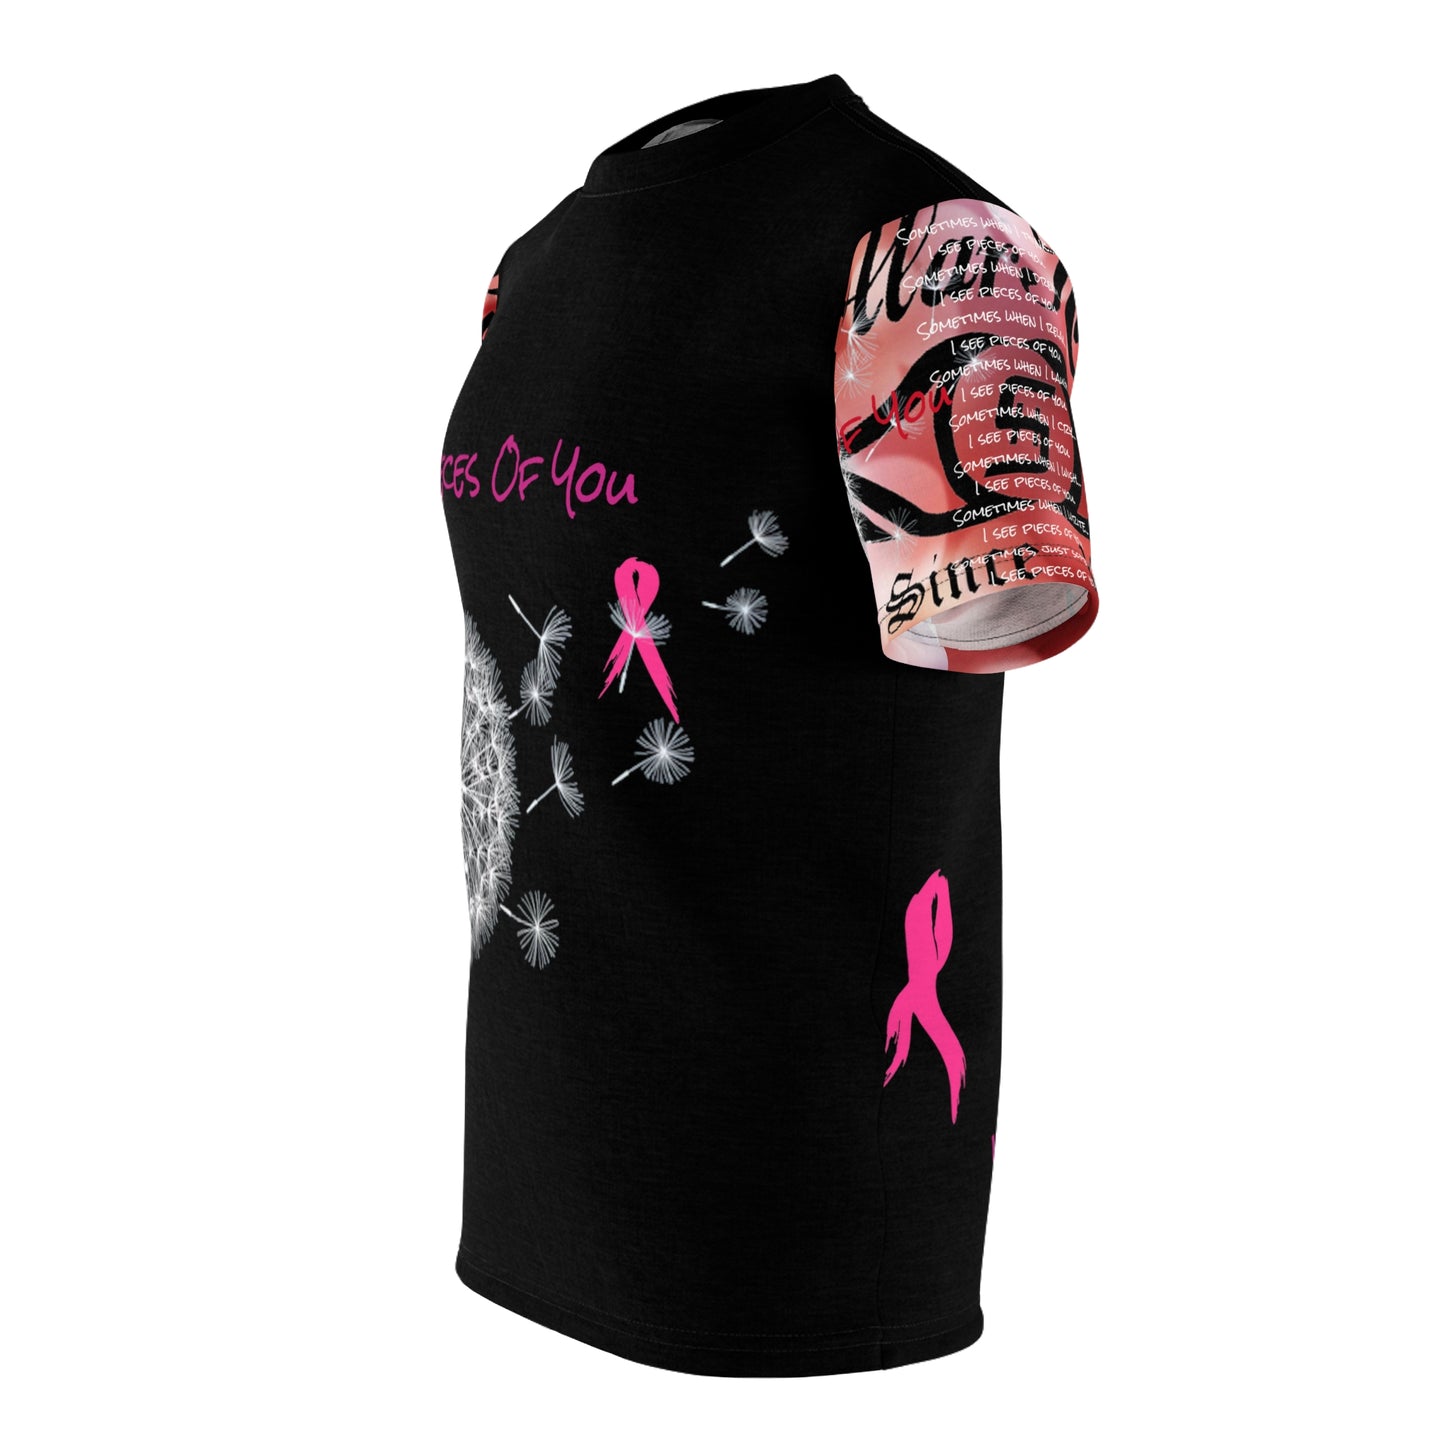 Awareness - Breast Cancer - Pieces of You Unisex Cut & Sew Tee (AOP)